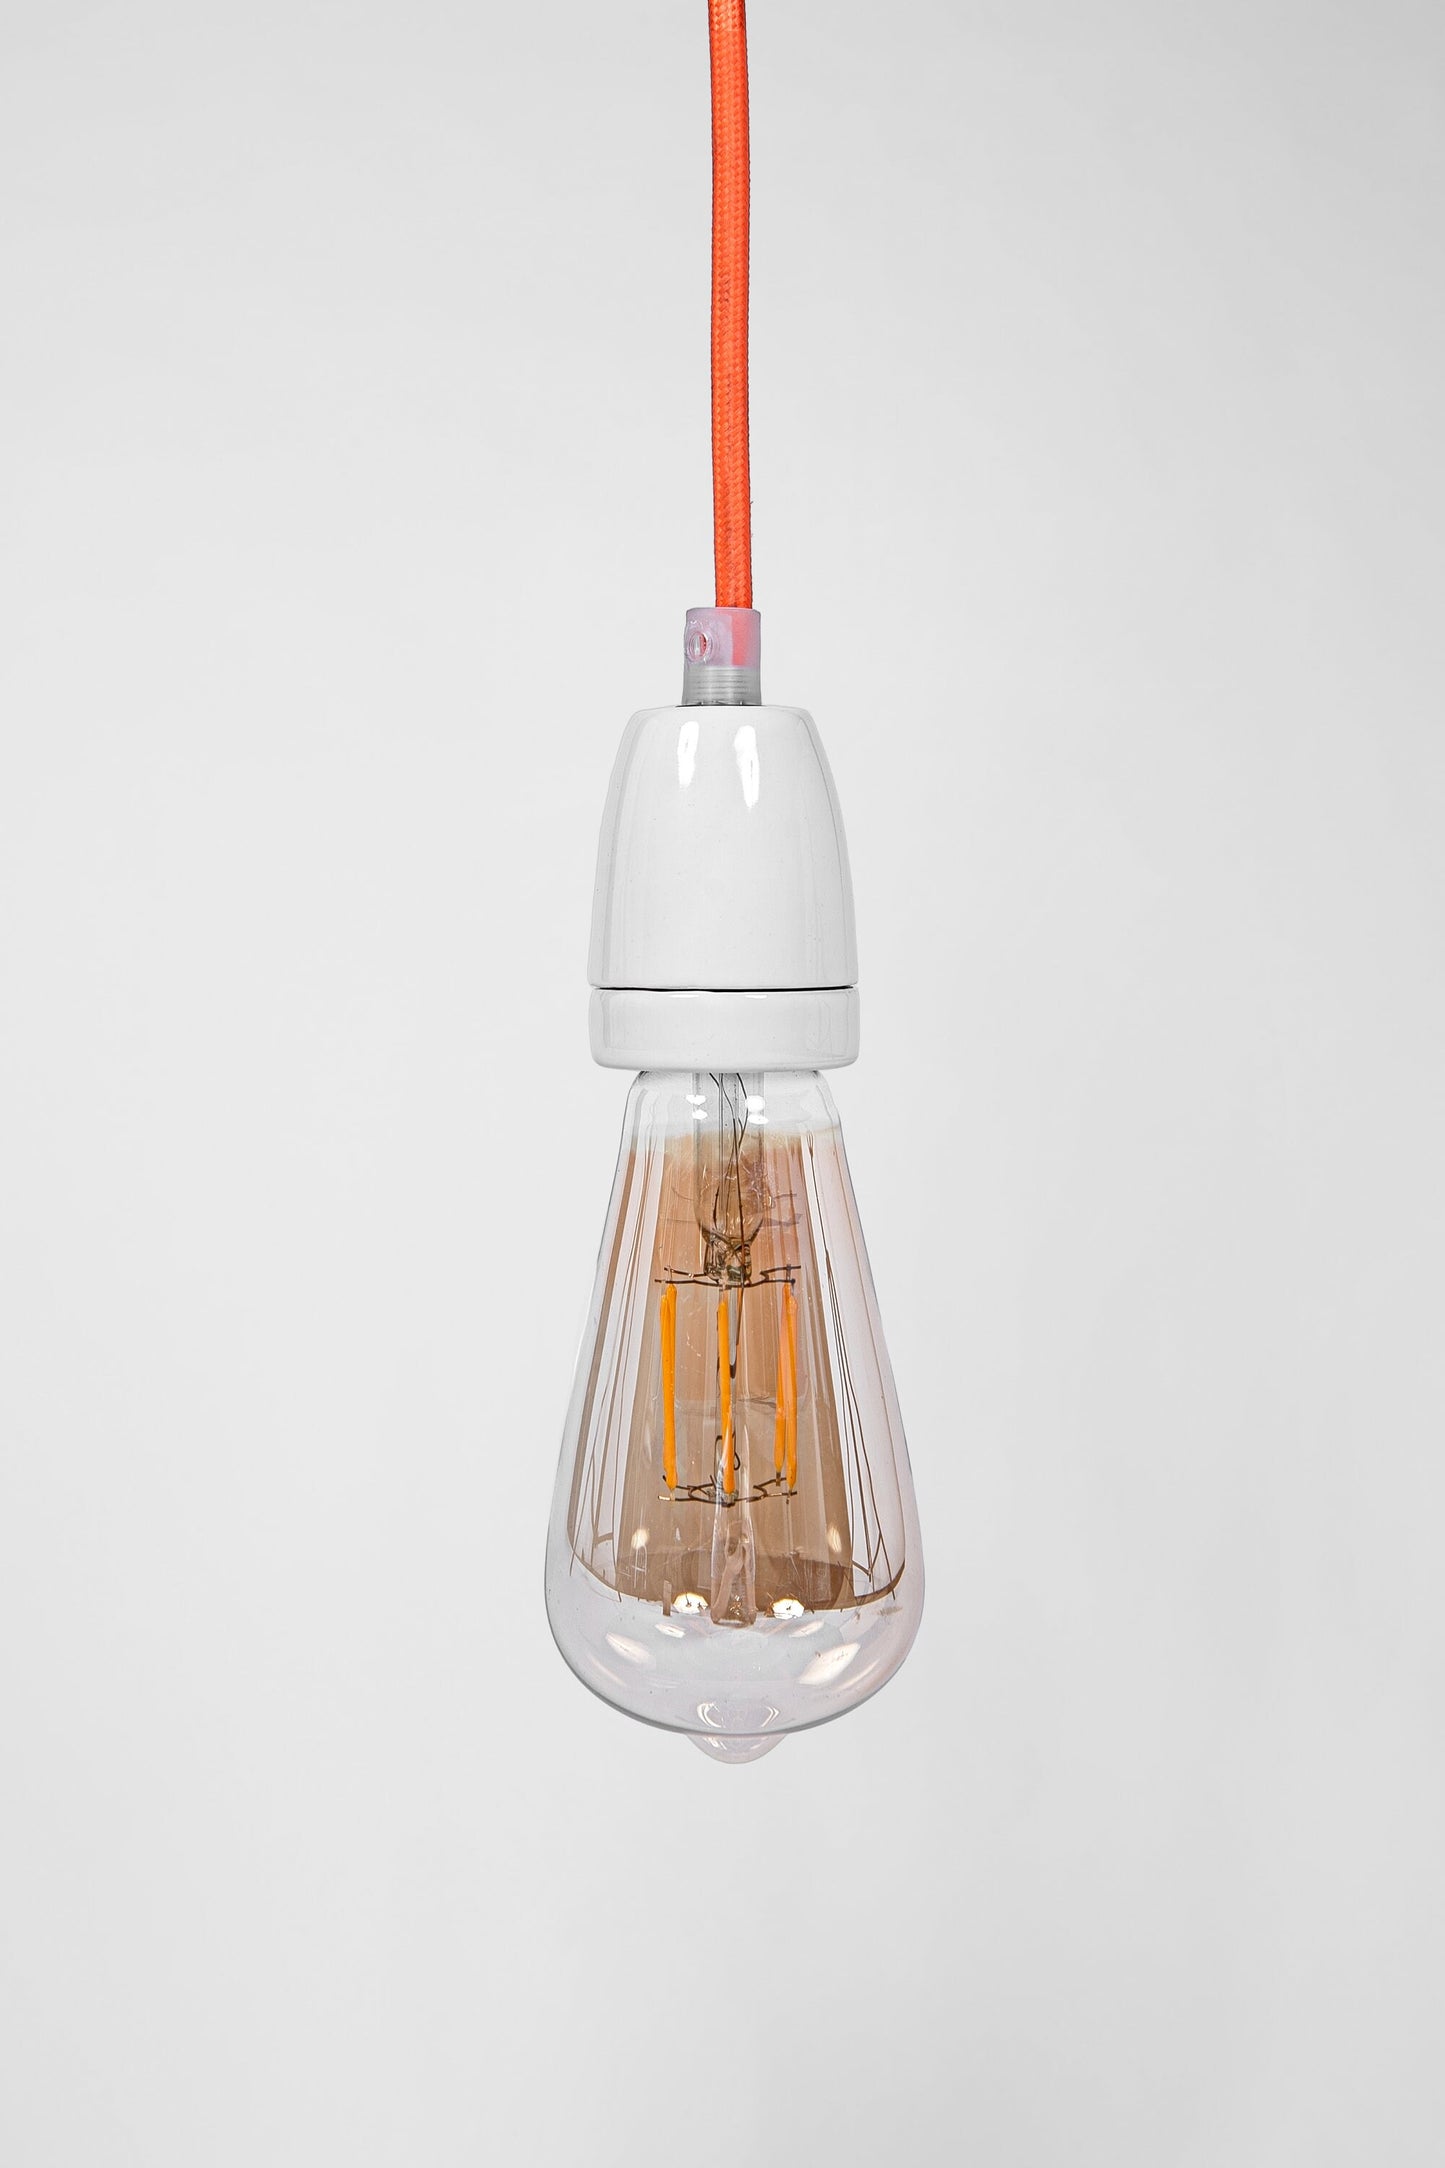 Oscar - Retro Vintage pendant lamp made of ceramic and textile cable